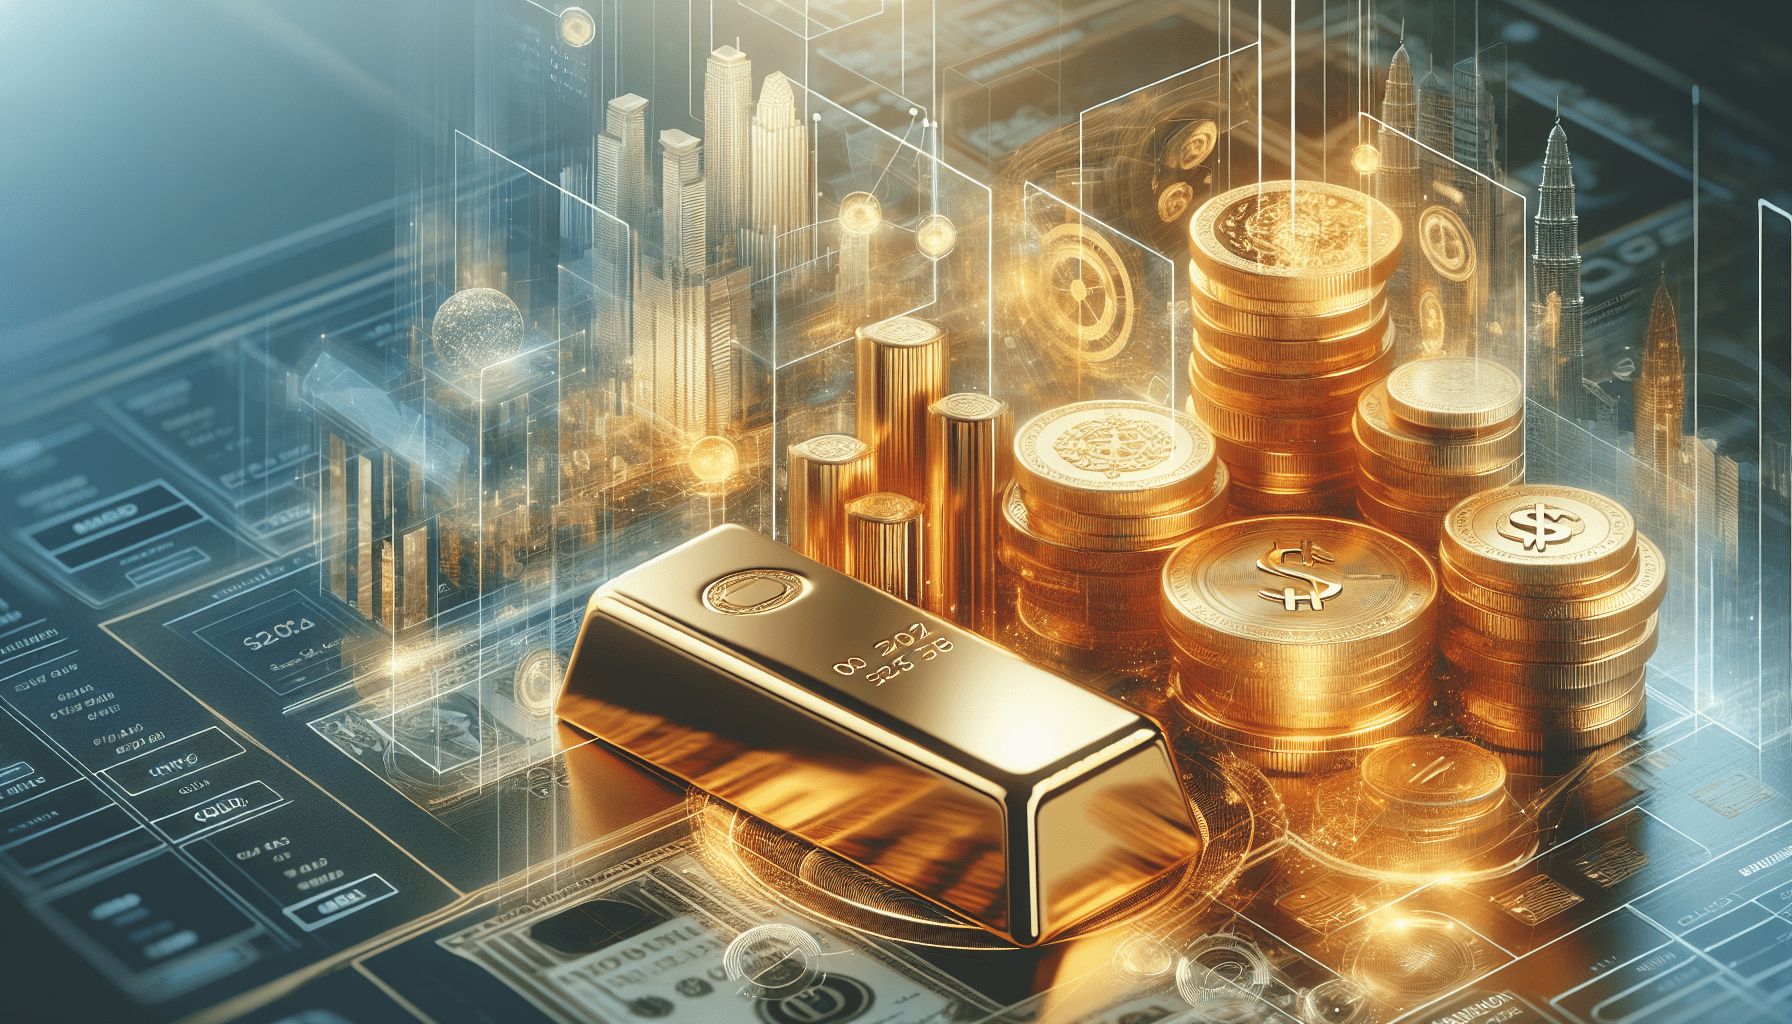 Are There Any Rewards Programs Or Loyalty Benefits For Gold Investors With Malaysian Banks?